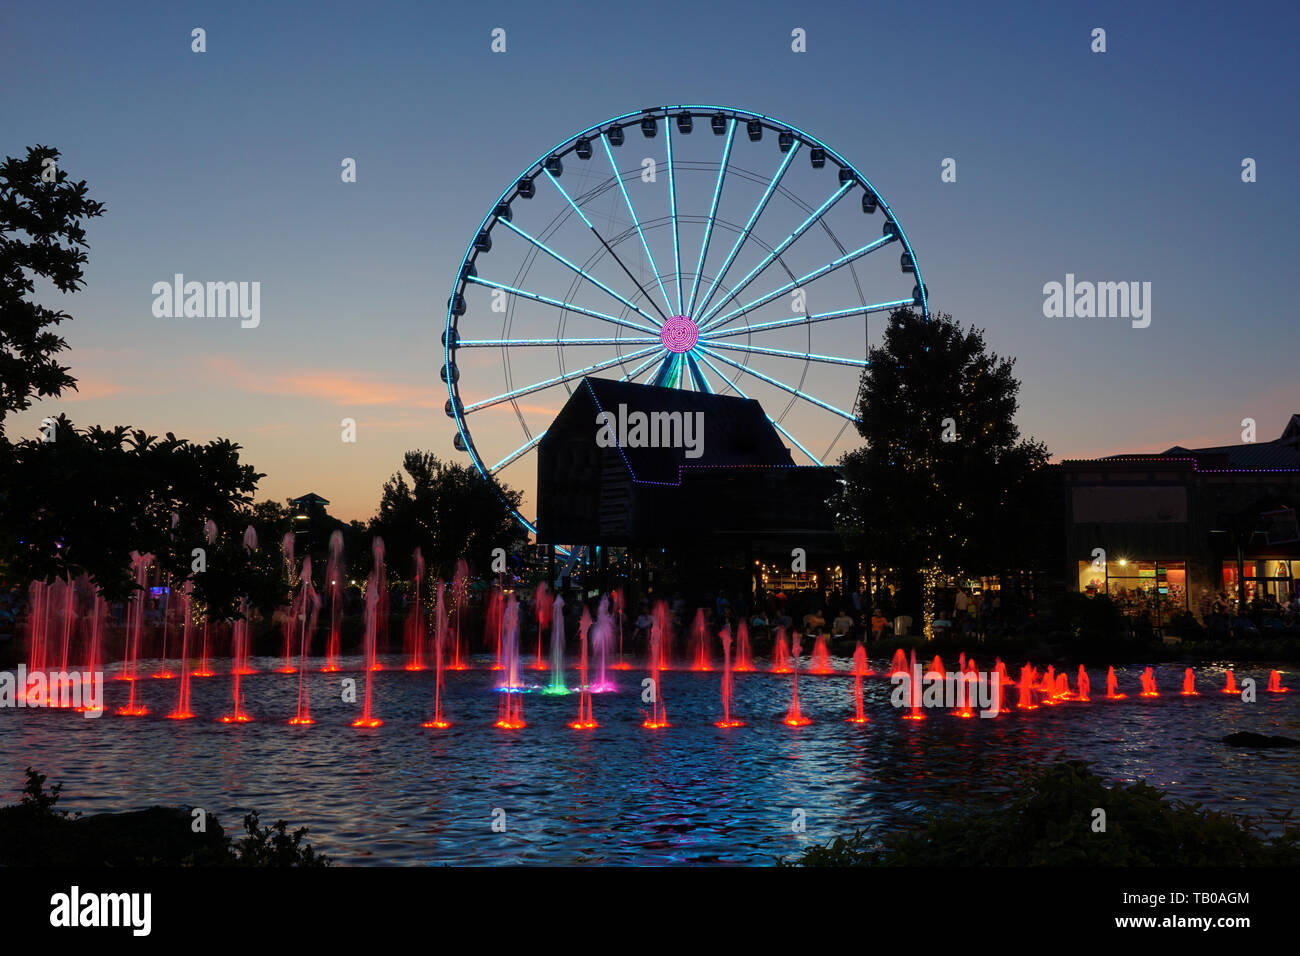 Ferris wheel and water fountain with colored lights at dusk Stock Photo